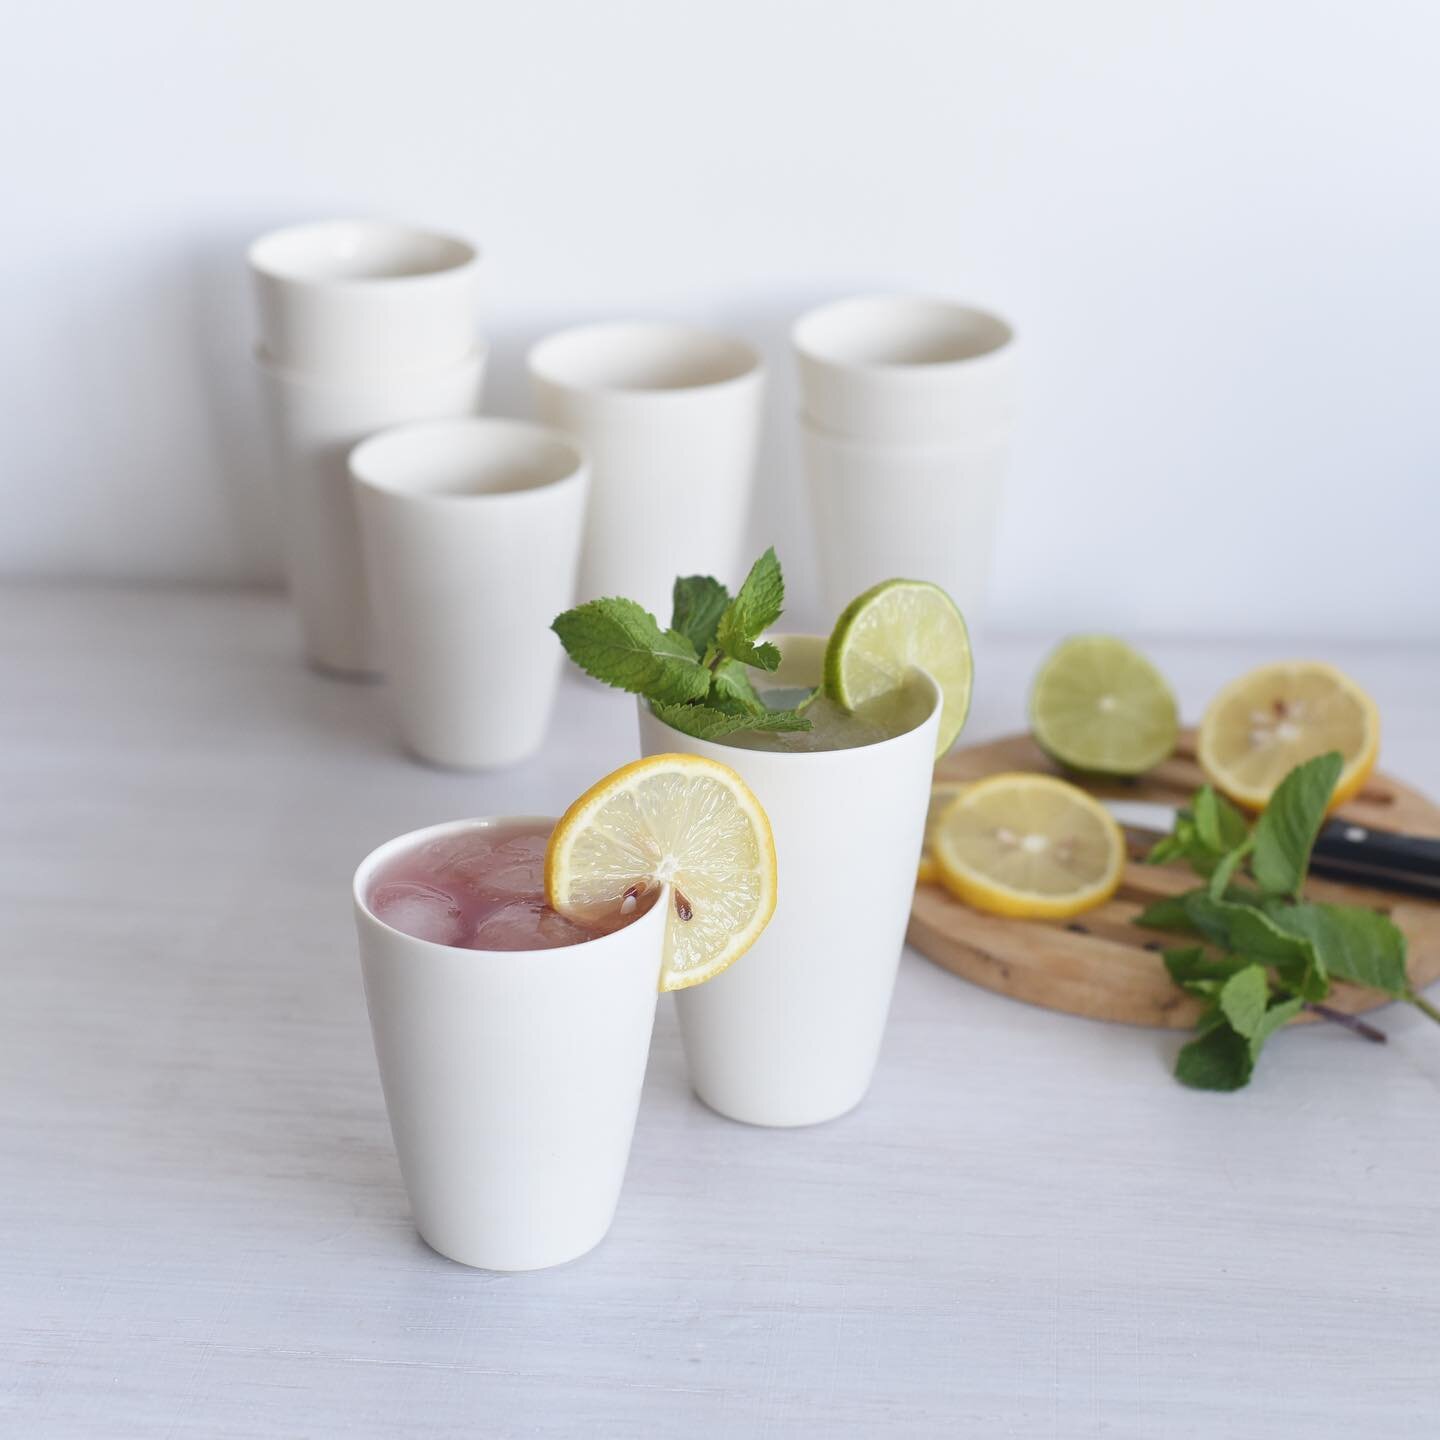 May bank holiday holiday means drinks time! (For you&hellip; I&rsquo;m working 😢) 

As a potter, I love drinking out of porcelain. These chaps are light, translucent and and elegant, but still have that handmade feel 👌 Have peek on my webshop if yo